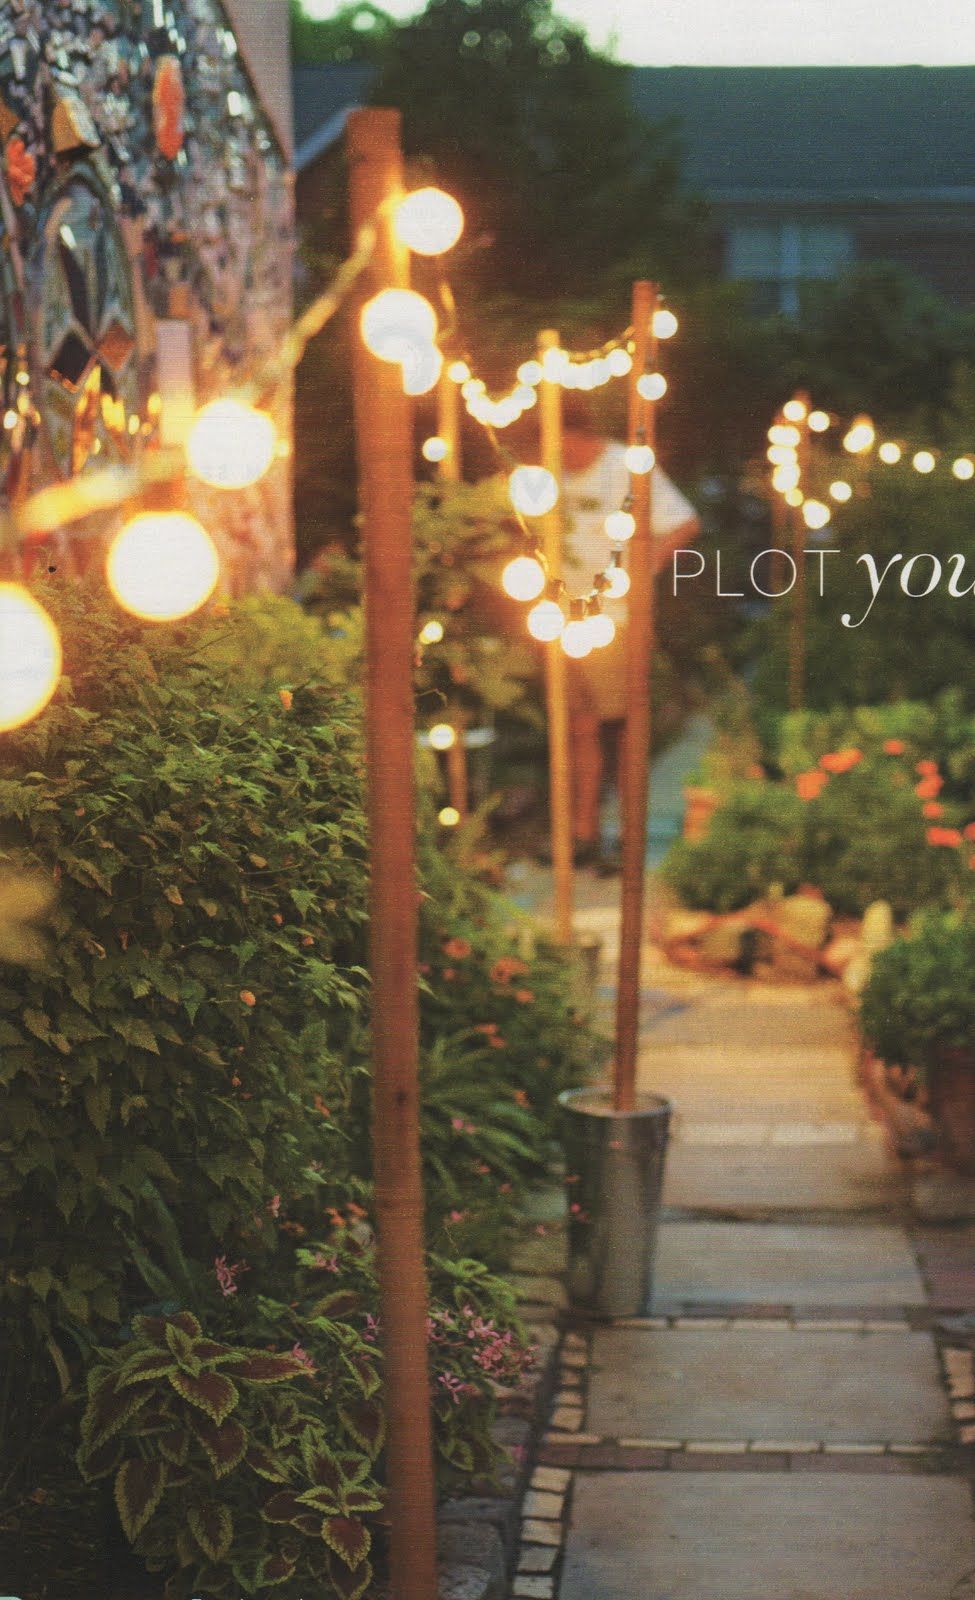 Use sand filled buckets and wooden posts to string lights around your reception